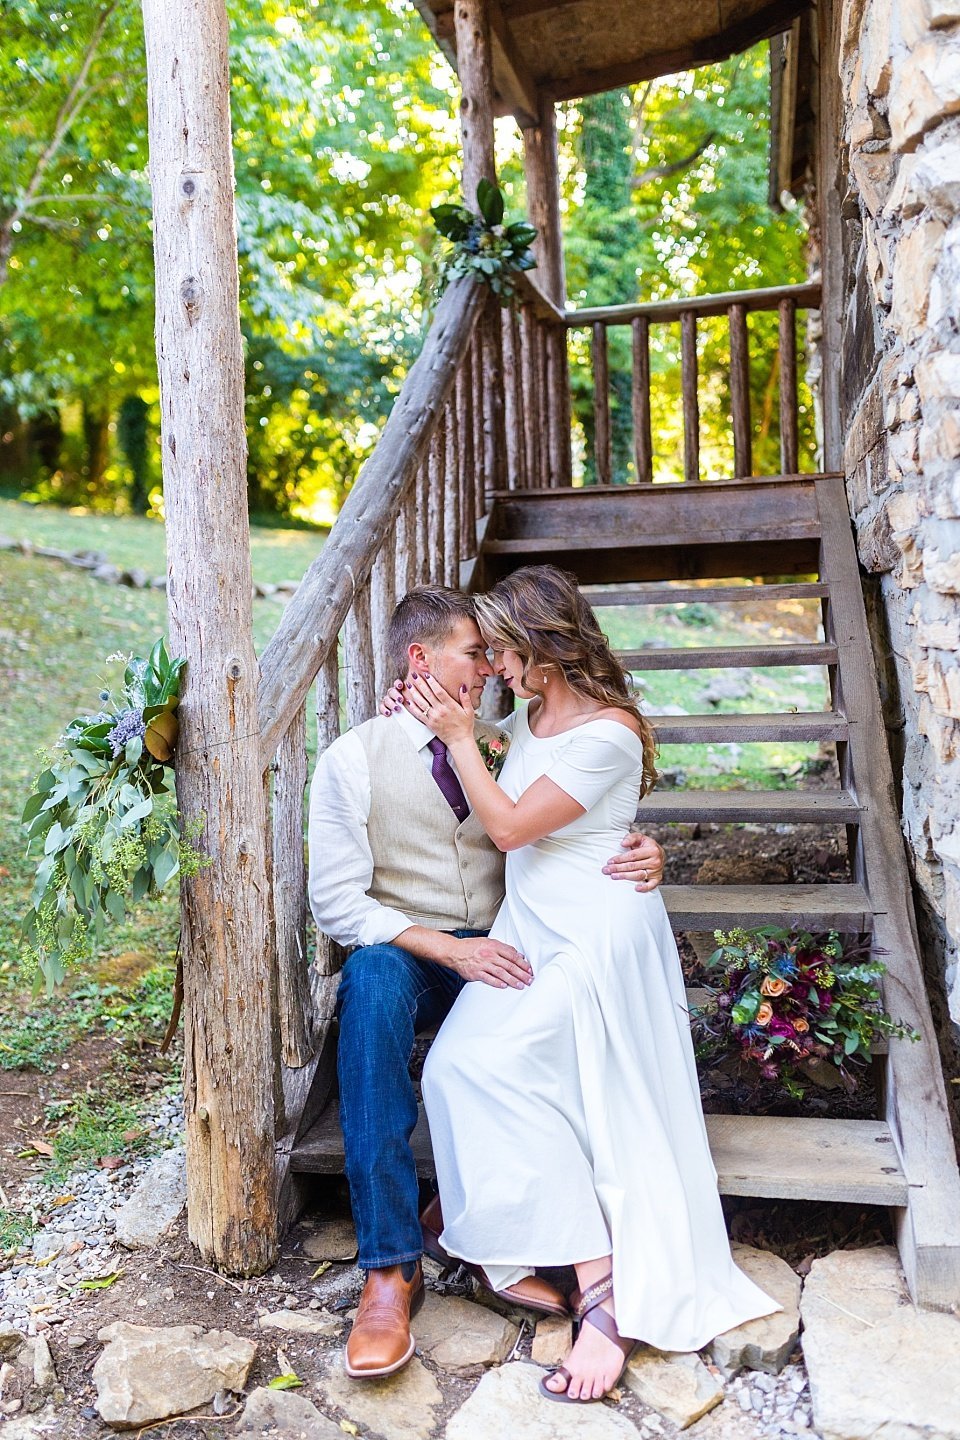 Bride and groom seated on staircase sharing a moment in rustic Asheville wedding.